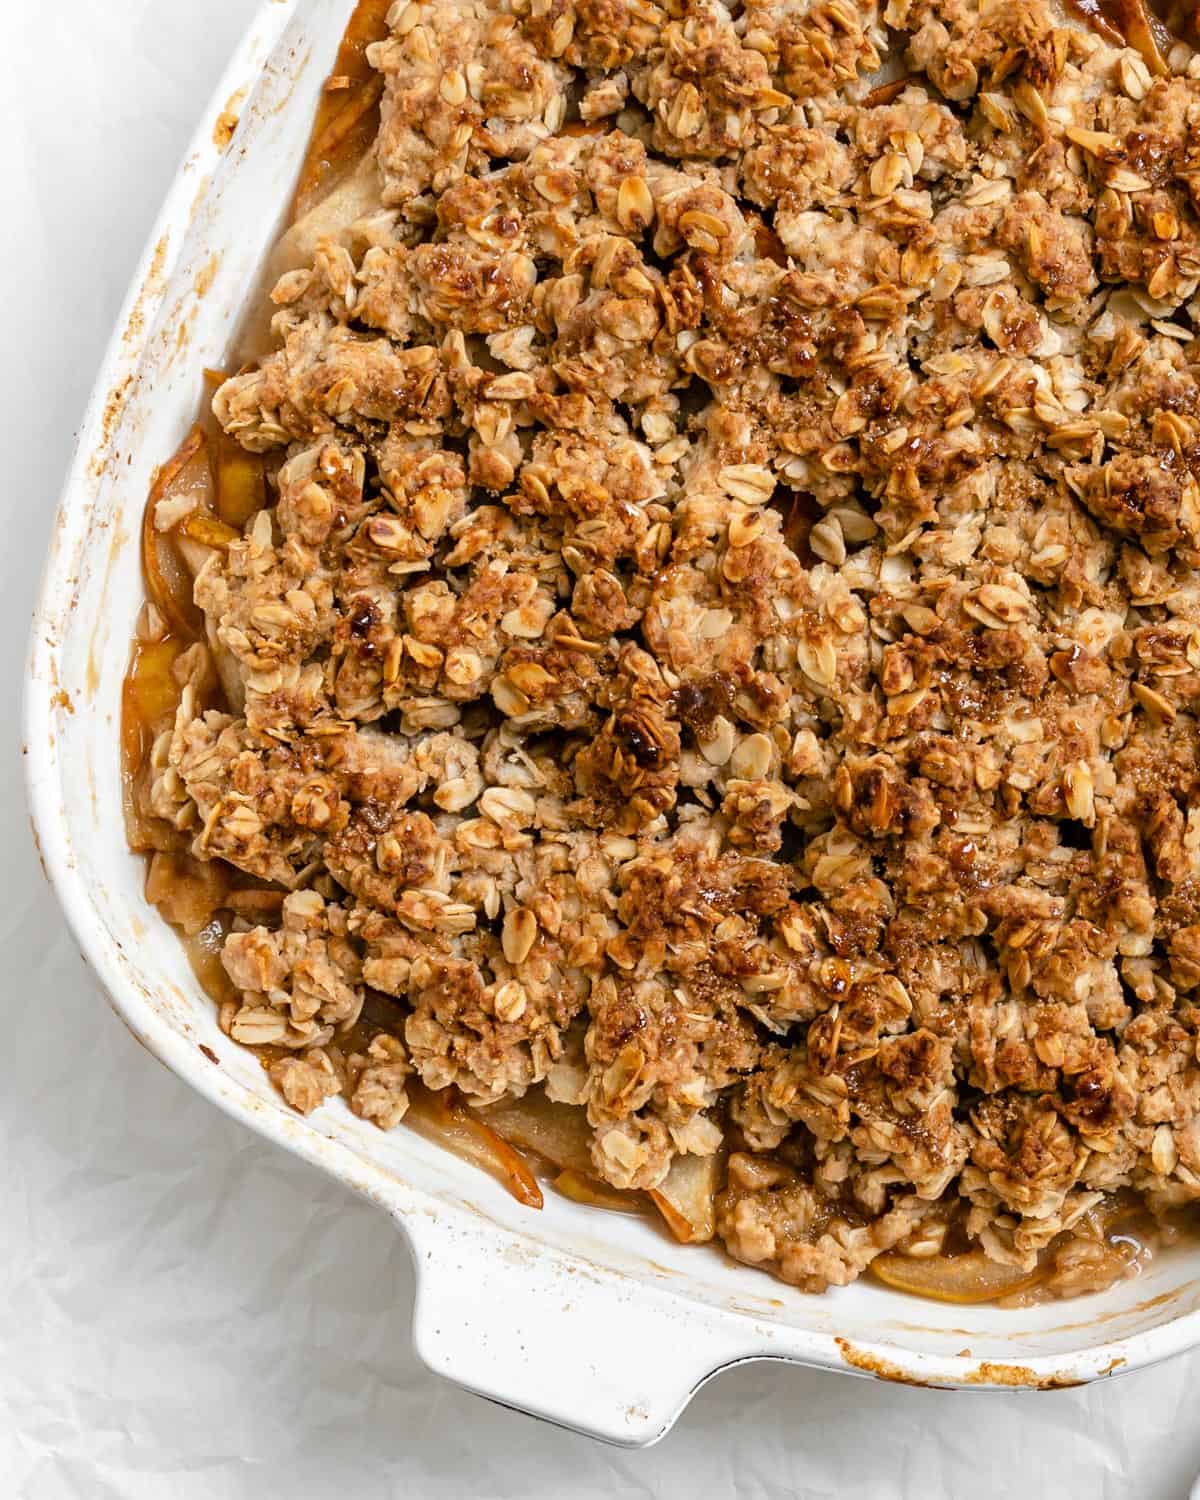 completed Easy Pear Crisp [Vegan Pear Crumble] in a baking tray